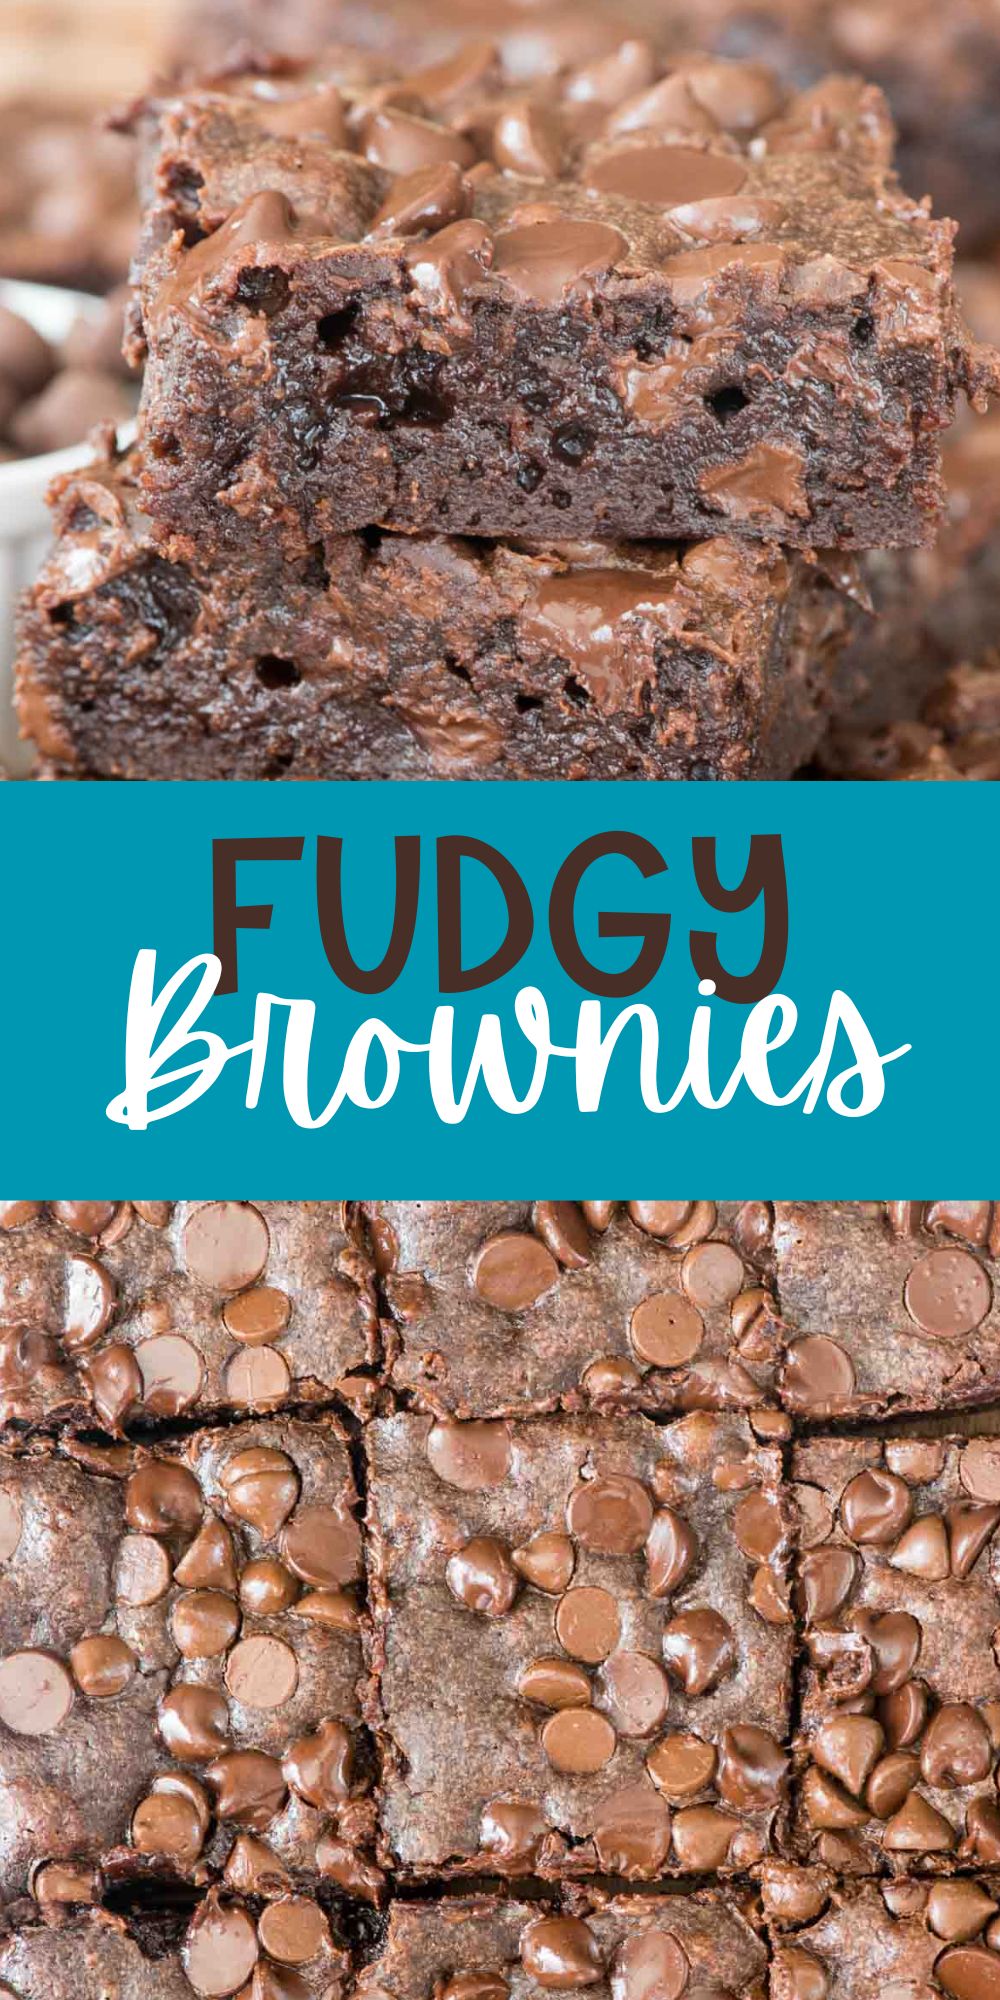 two photos of stacked brownies with lots of chocolate chips baked in with words on the image.